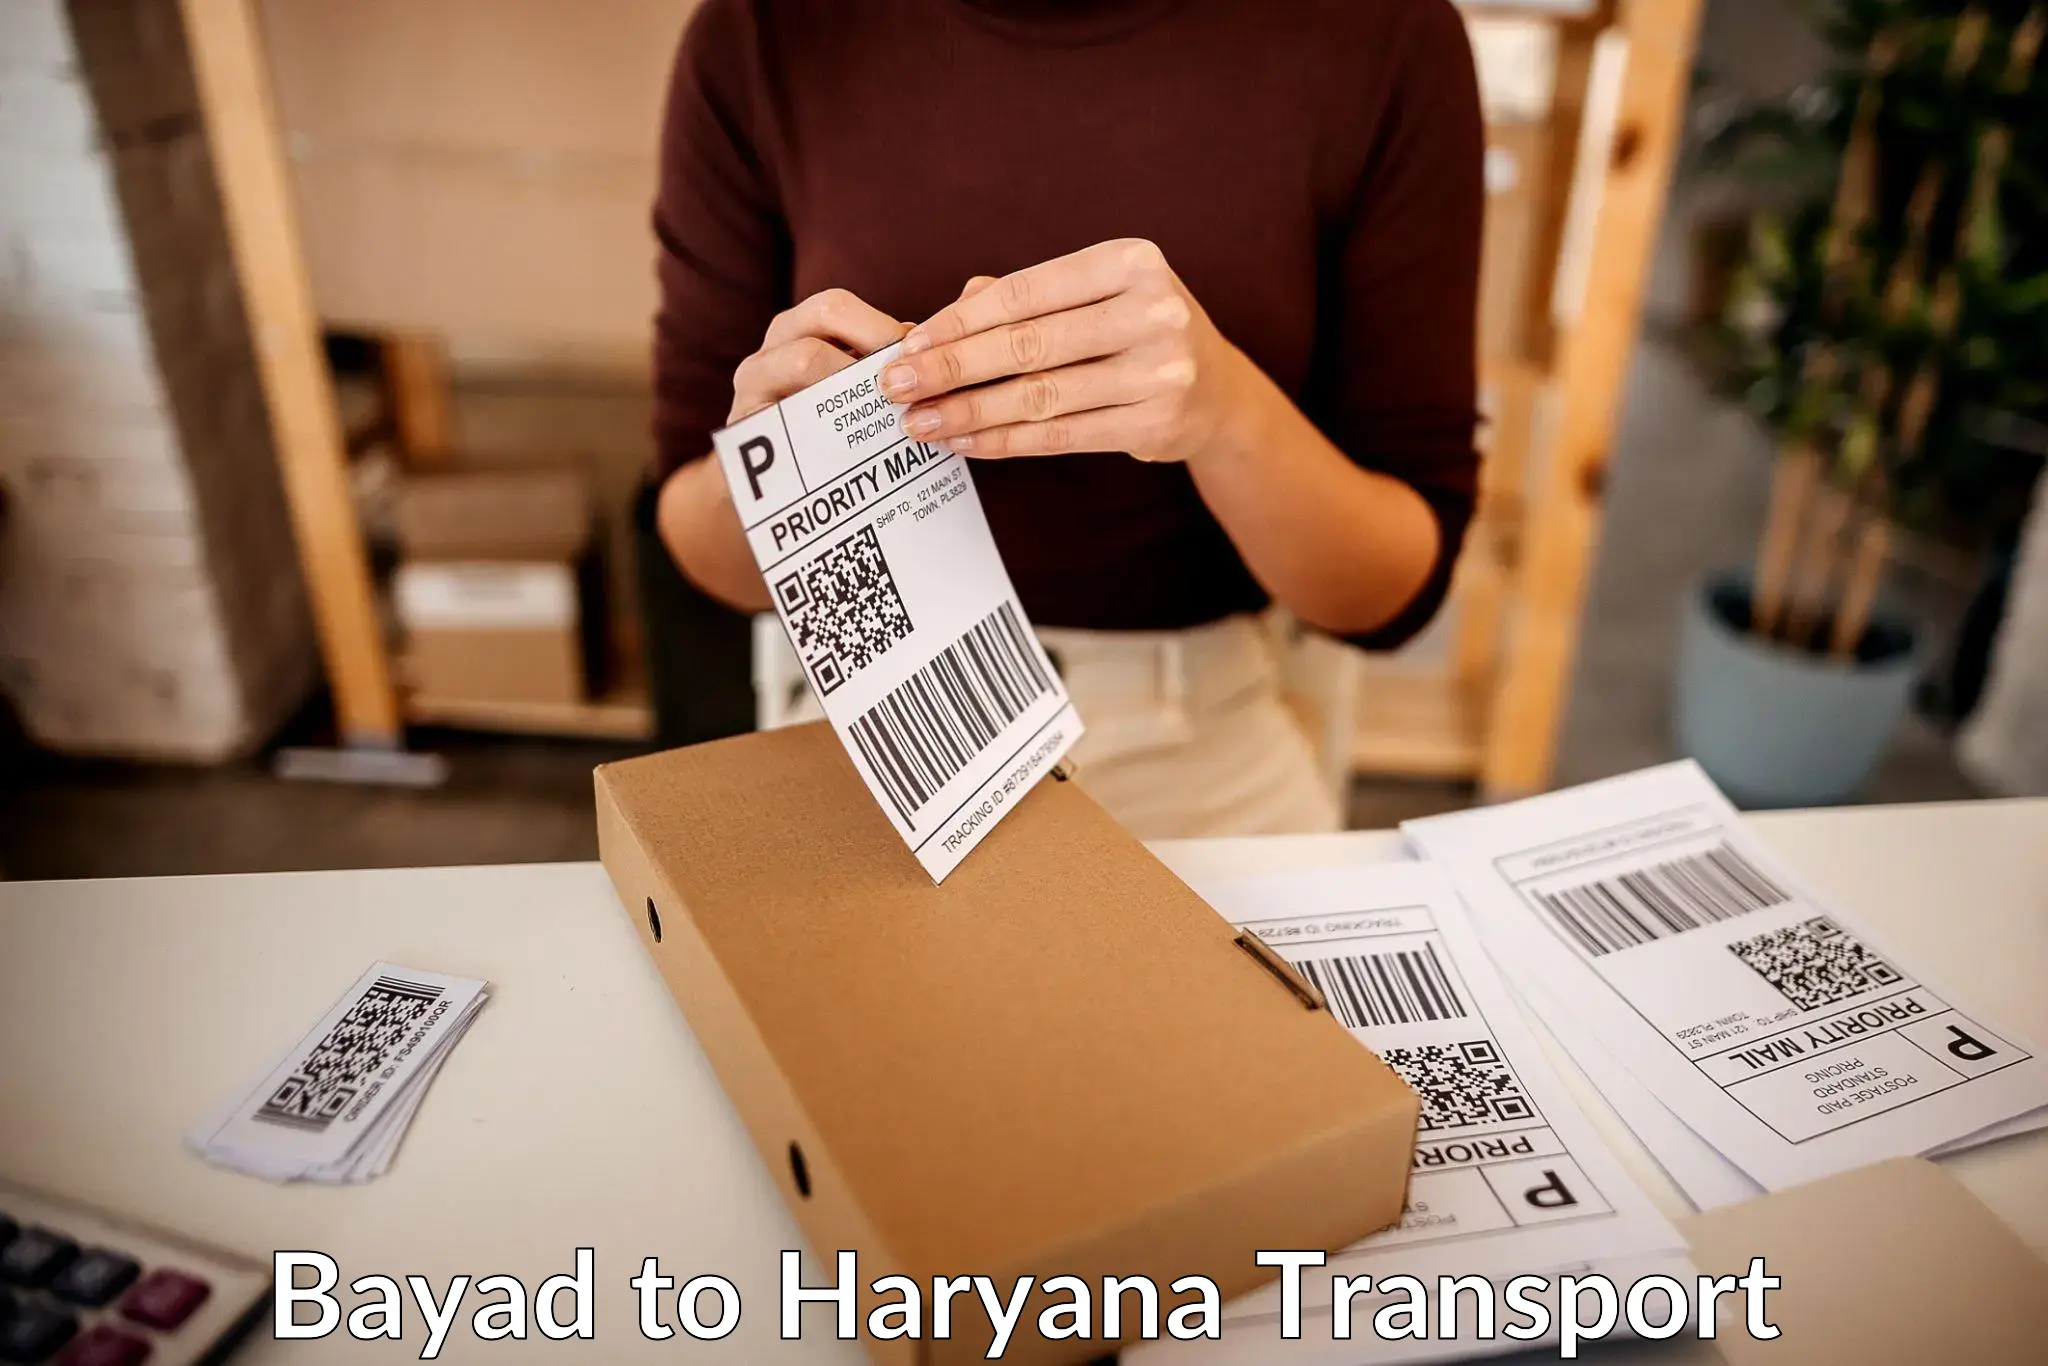 Air freight transport services in Bayad to Gohana